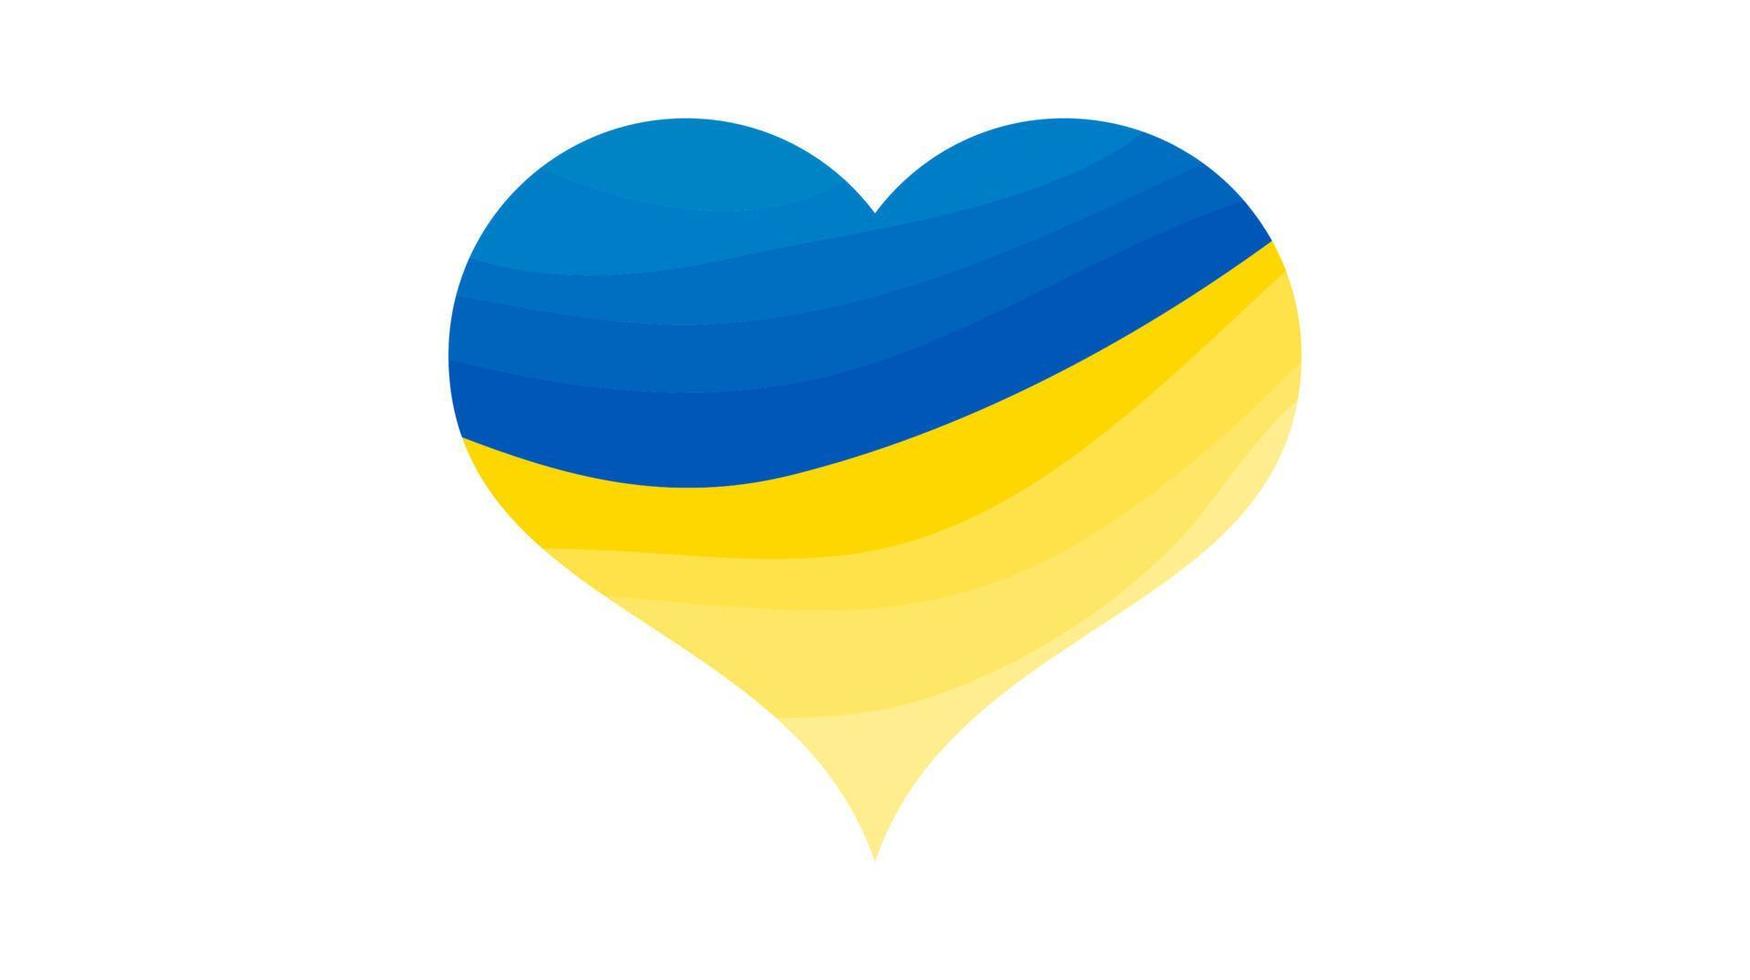 Heart in Ukrainian colors. Yellow and blue heart on white background. Vector illustration